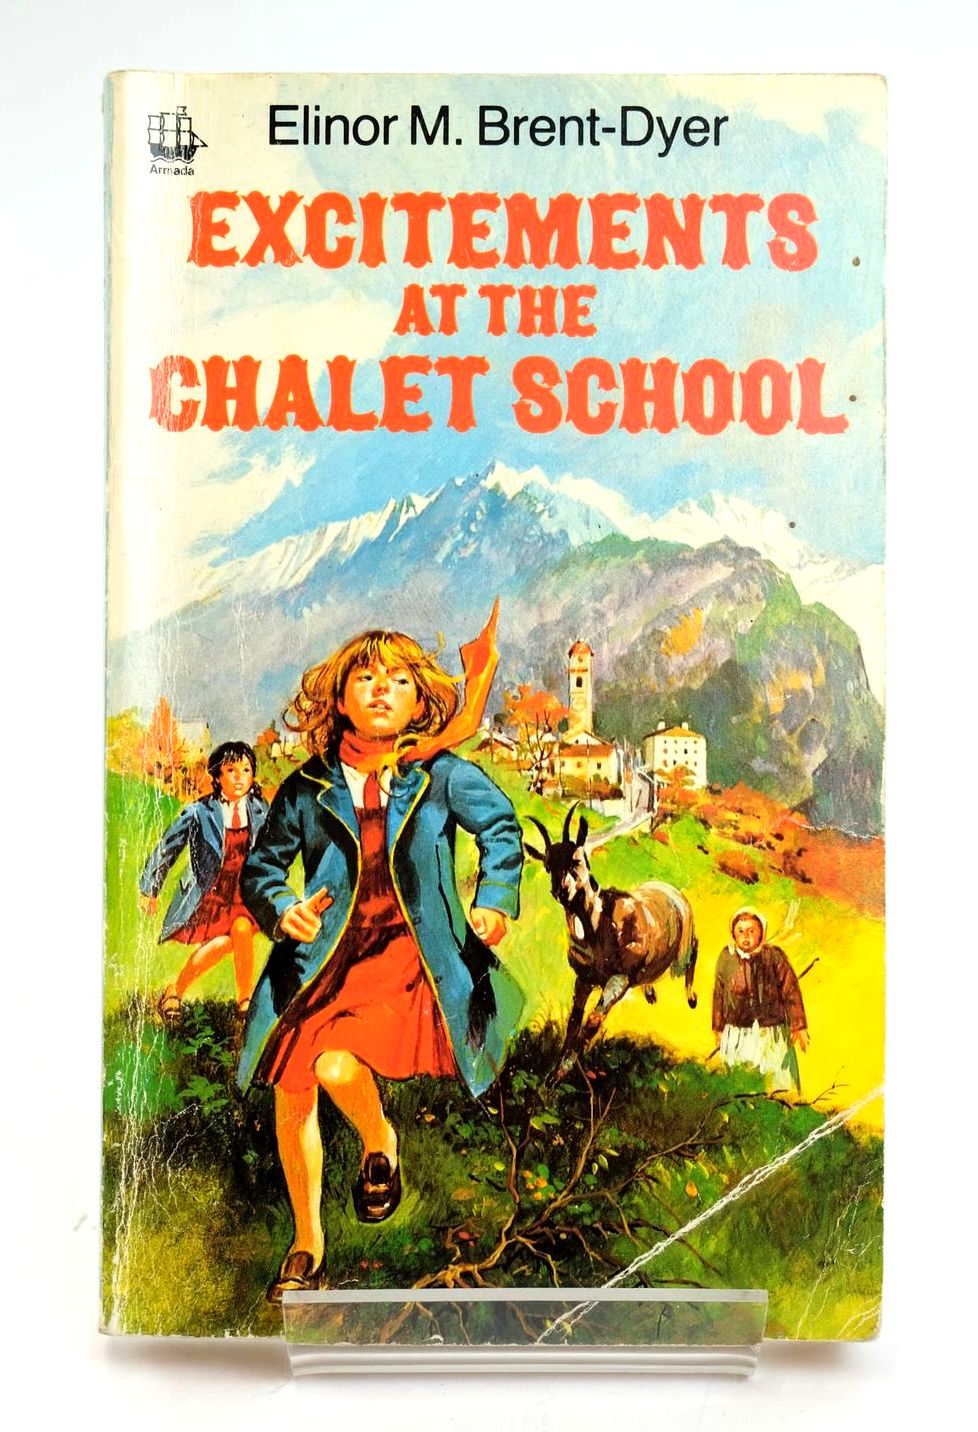 Photo of EXCITEMENTS AT THE CHALET SCHOOL written by Brent-Dyer, Elinor M. published by Armada (STOCK CODE: 1319284)  for sale by Stella & Rose's Books